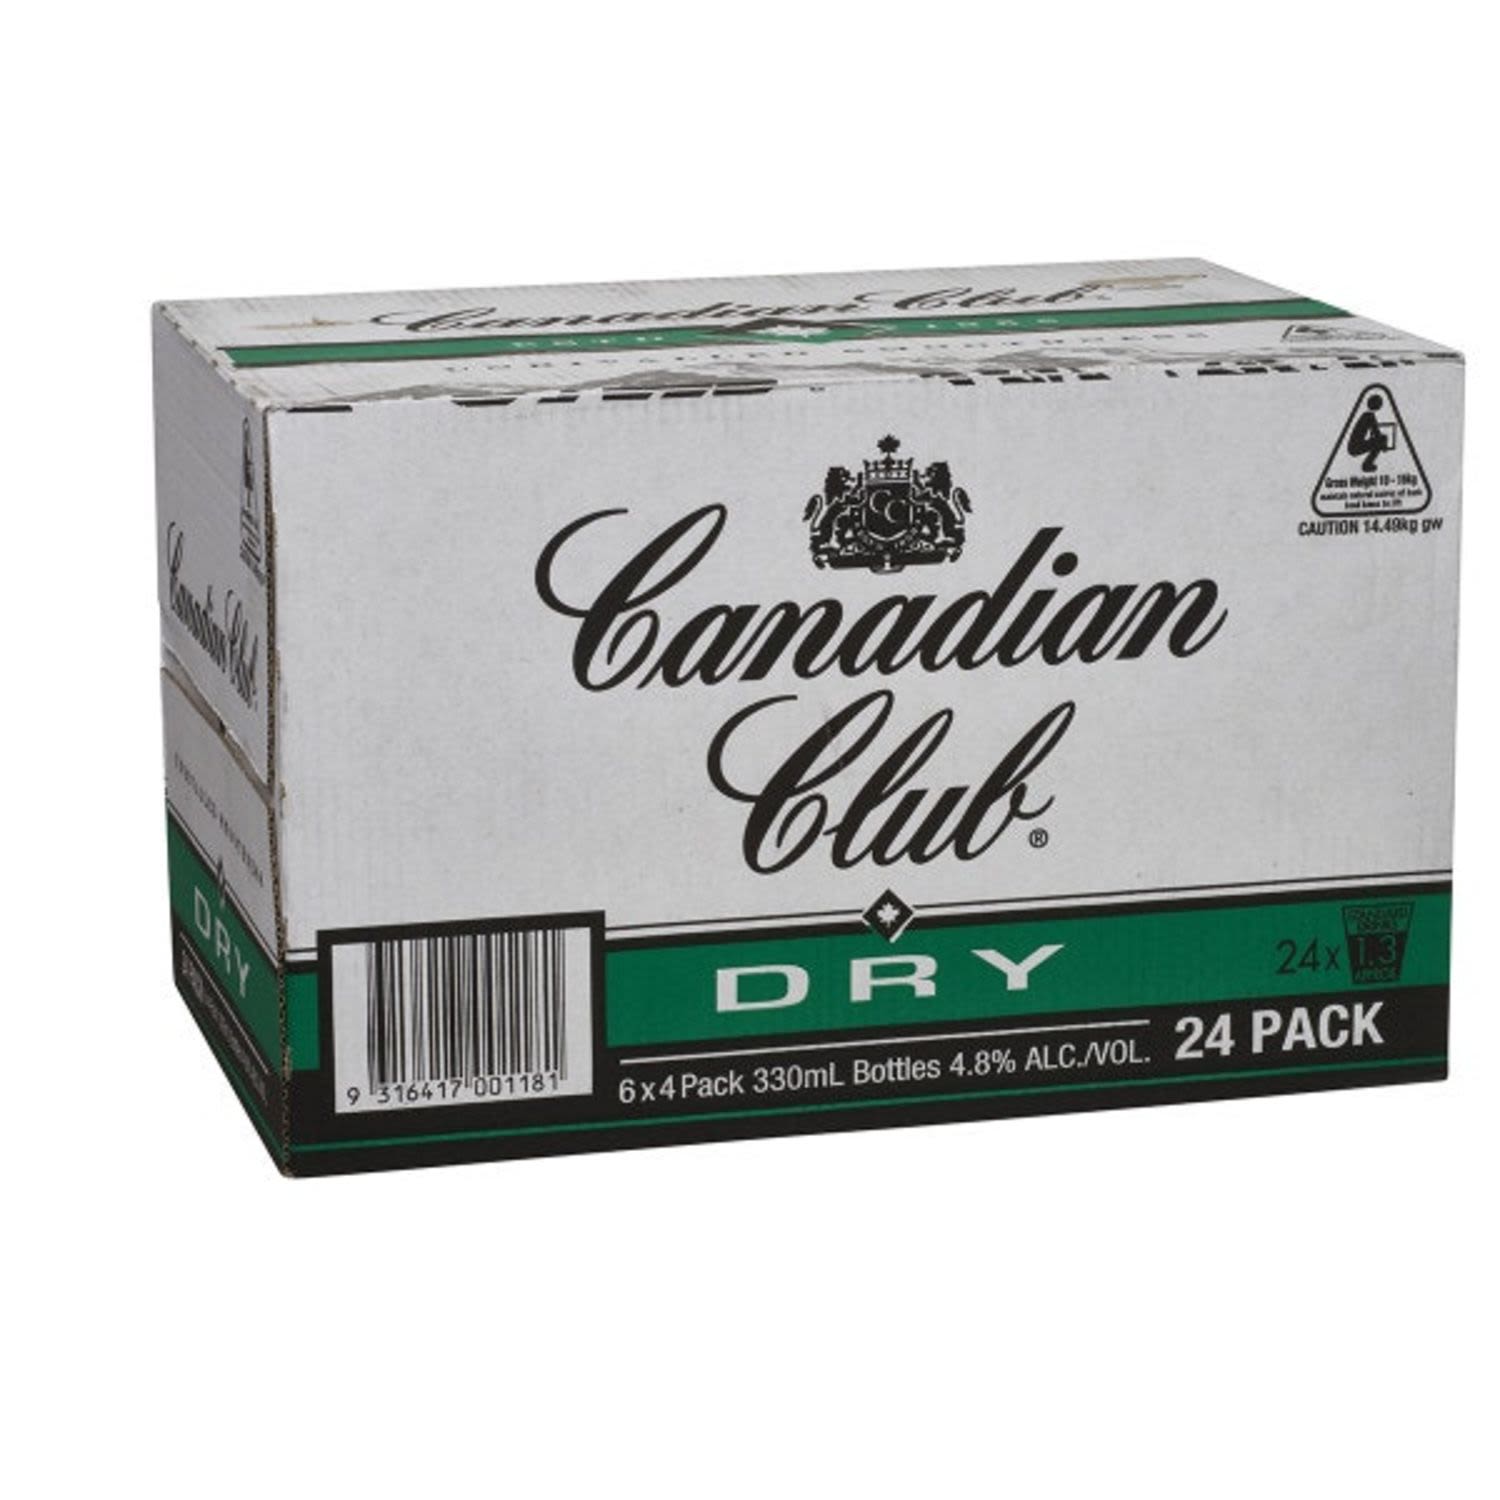 Canadian Club & Dry Bottle 330mL 24 Pack